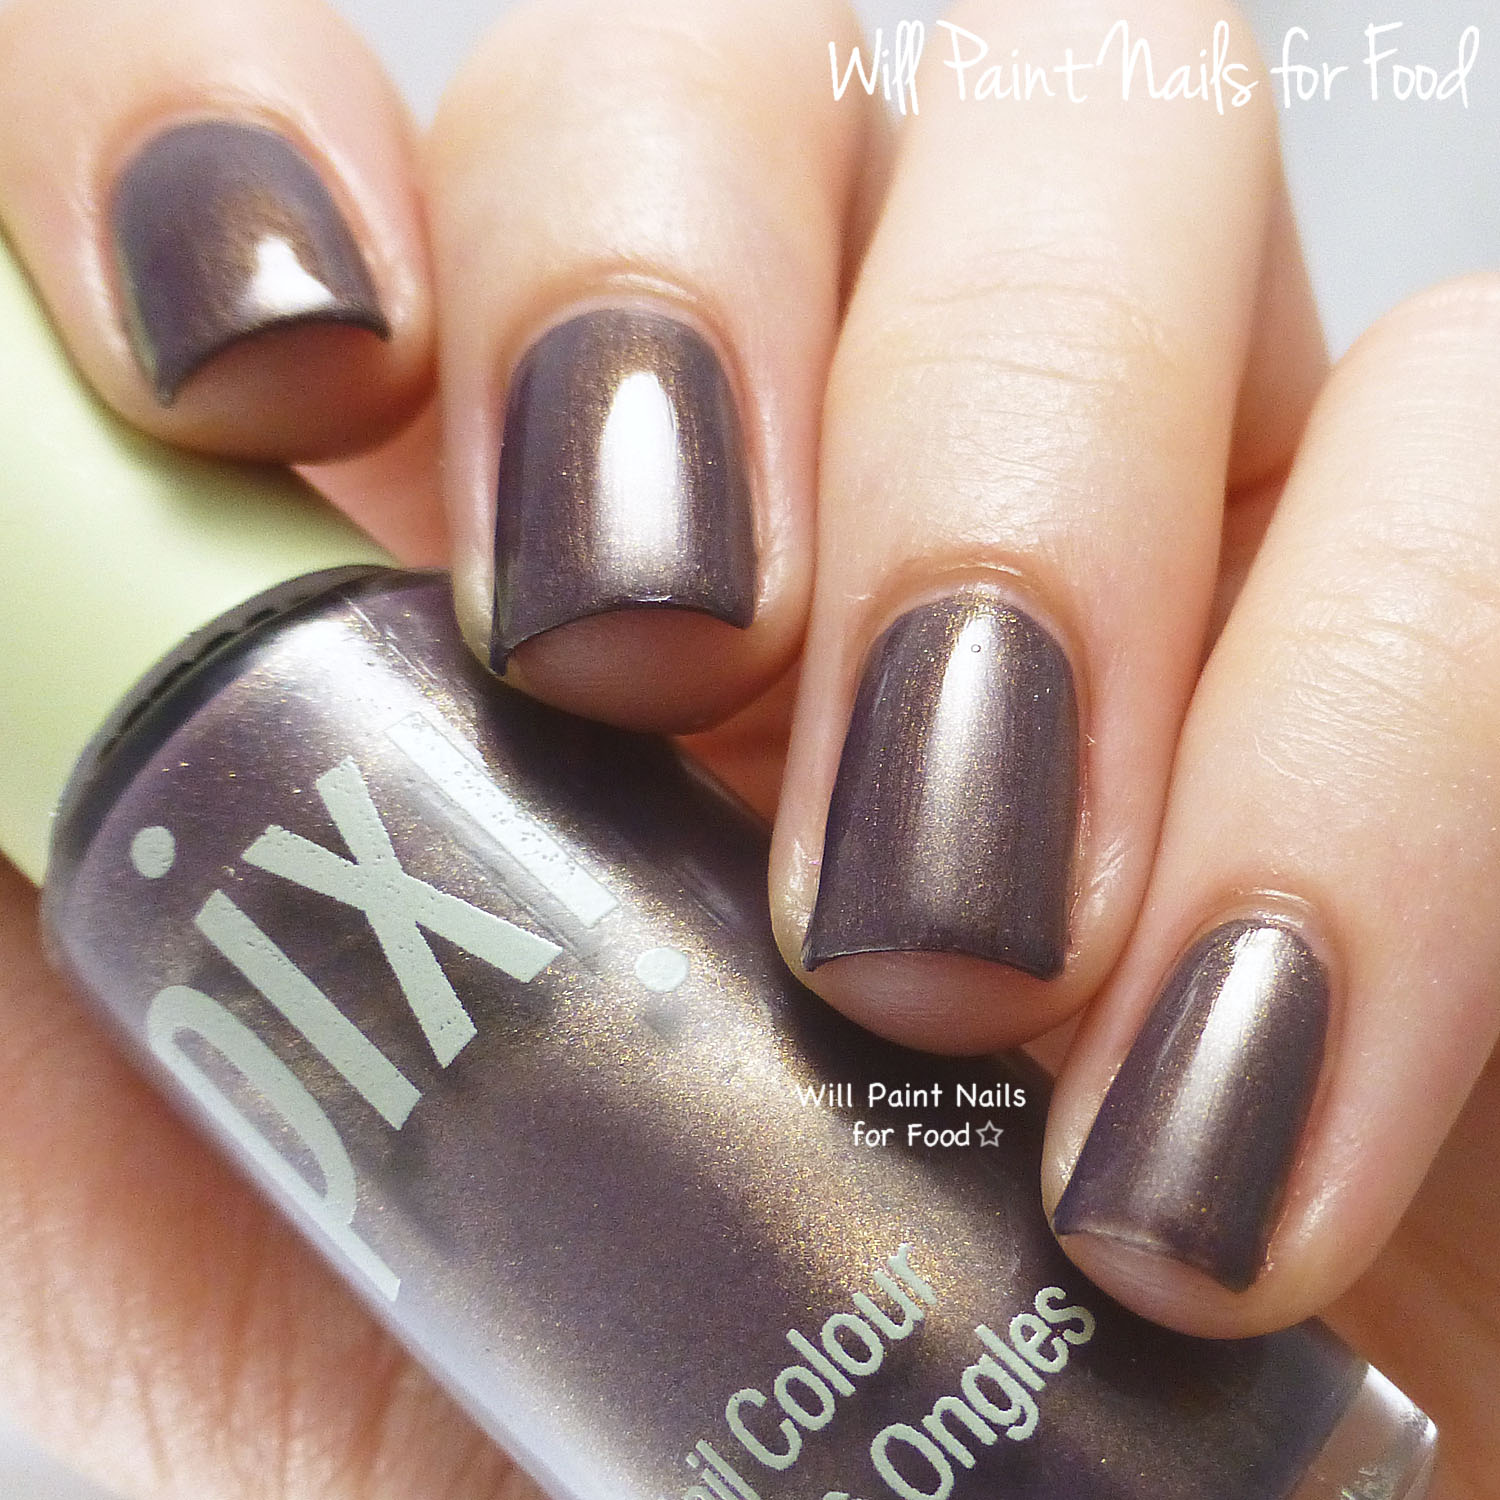 Pixi Nail Colour in Classy Cocoa swatch